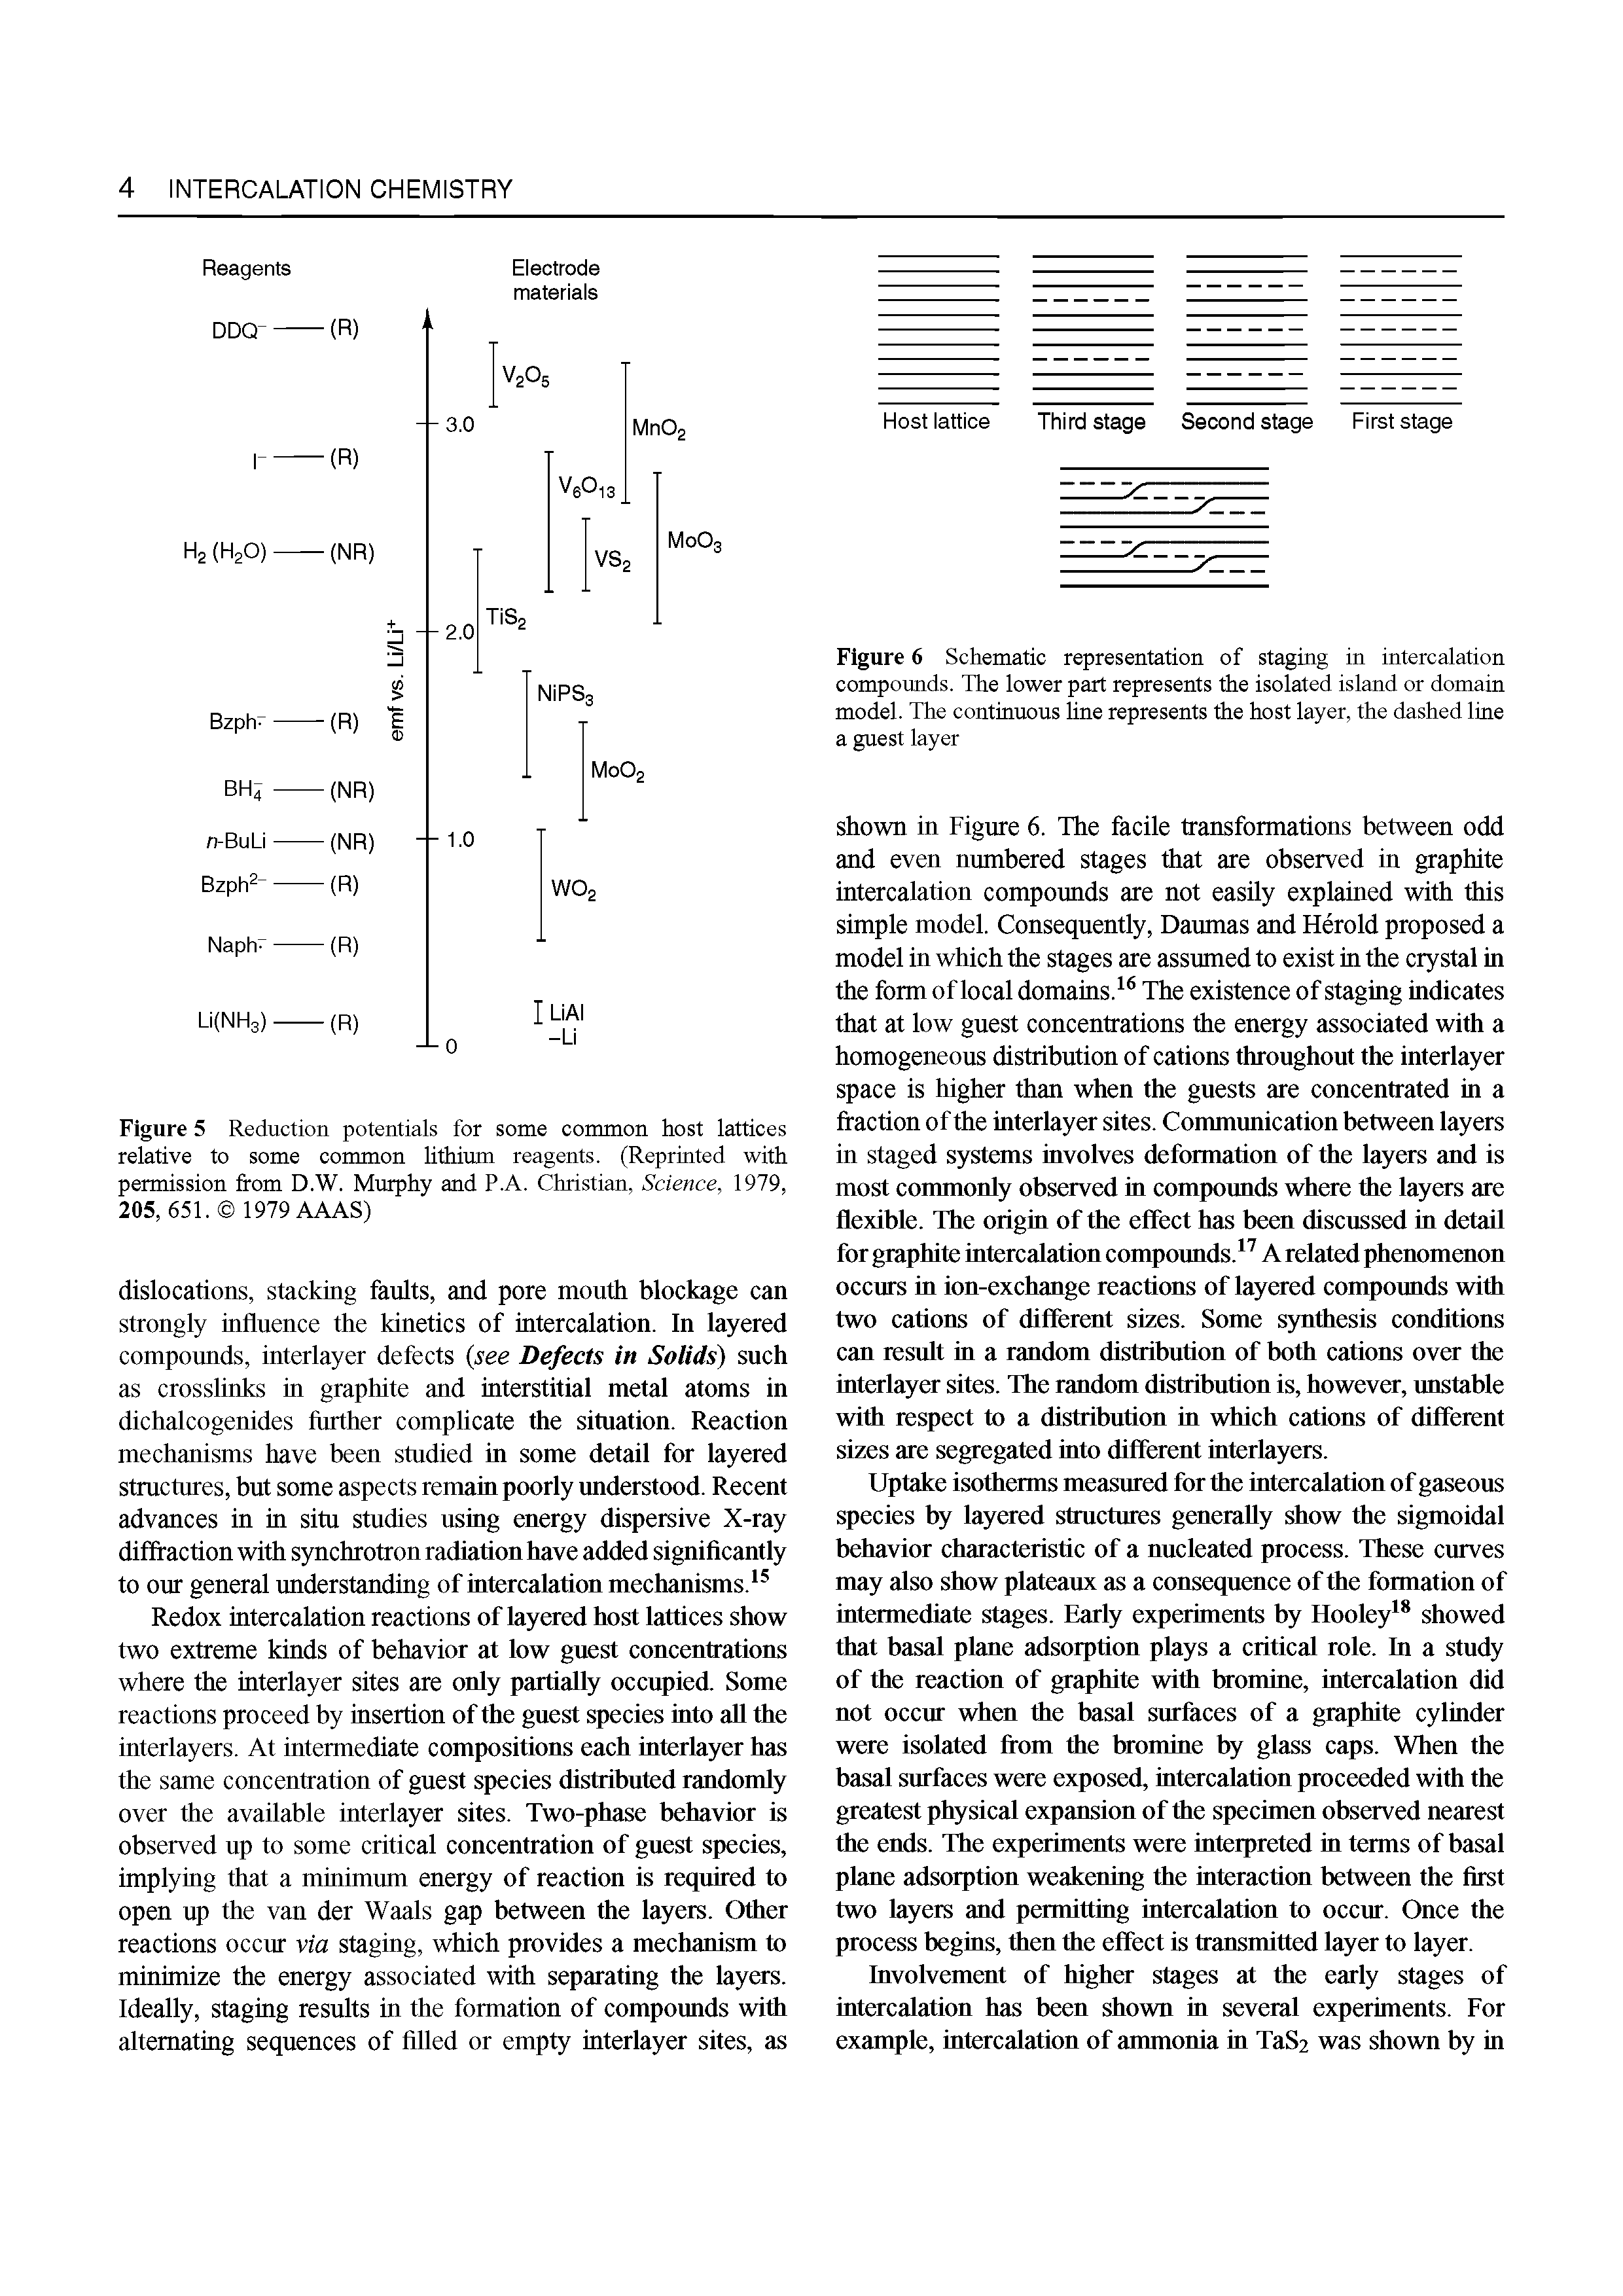 Figure 5 Reduction potentials for some common host lattices relative to some common lithium reagents. (Reprinted with permission from D.W. Murphy and P.A. Christian, Science, 1979, 205, 651. 1979 AAAS)...